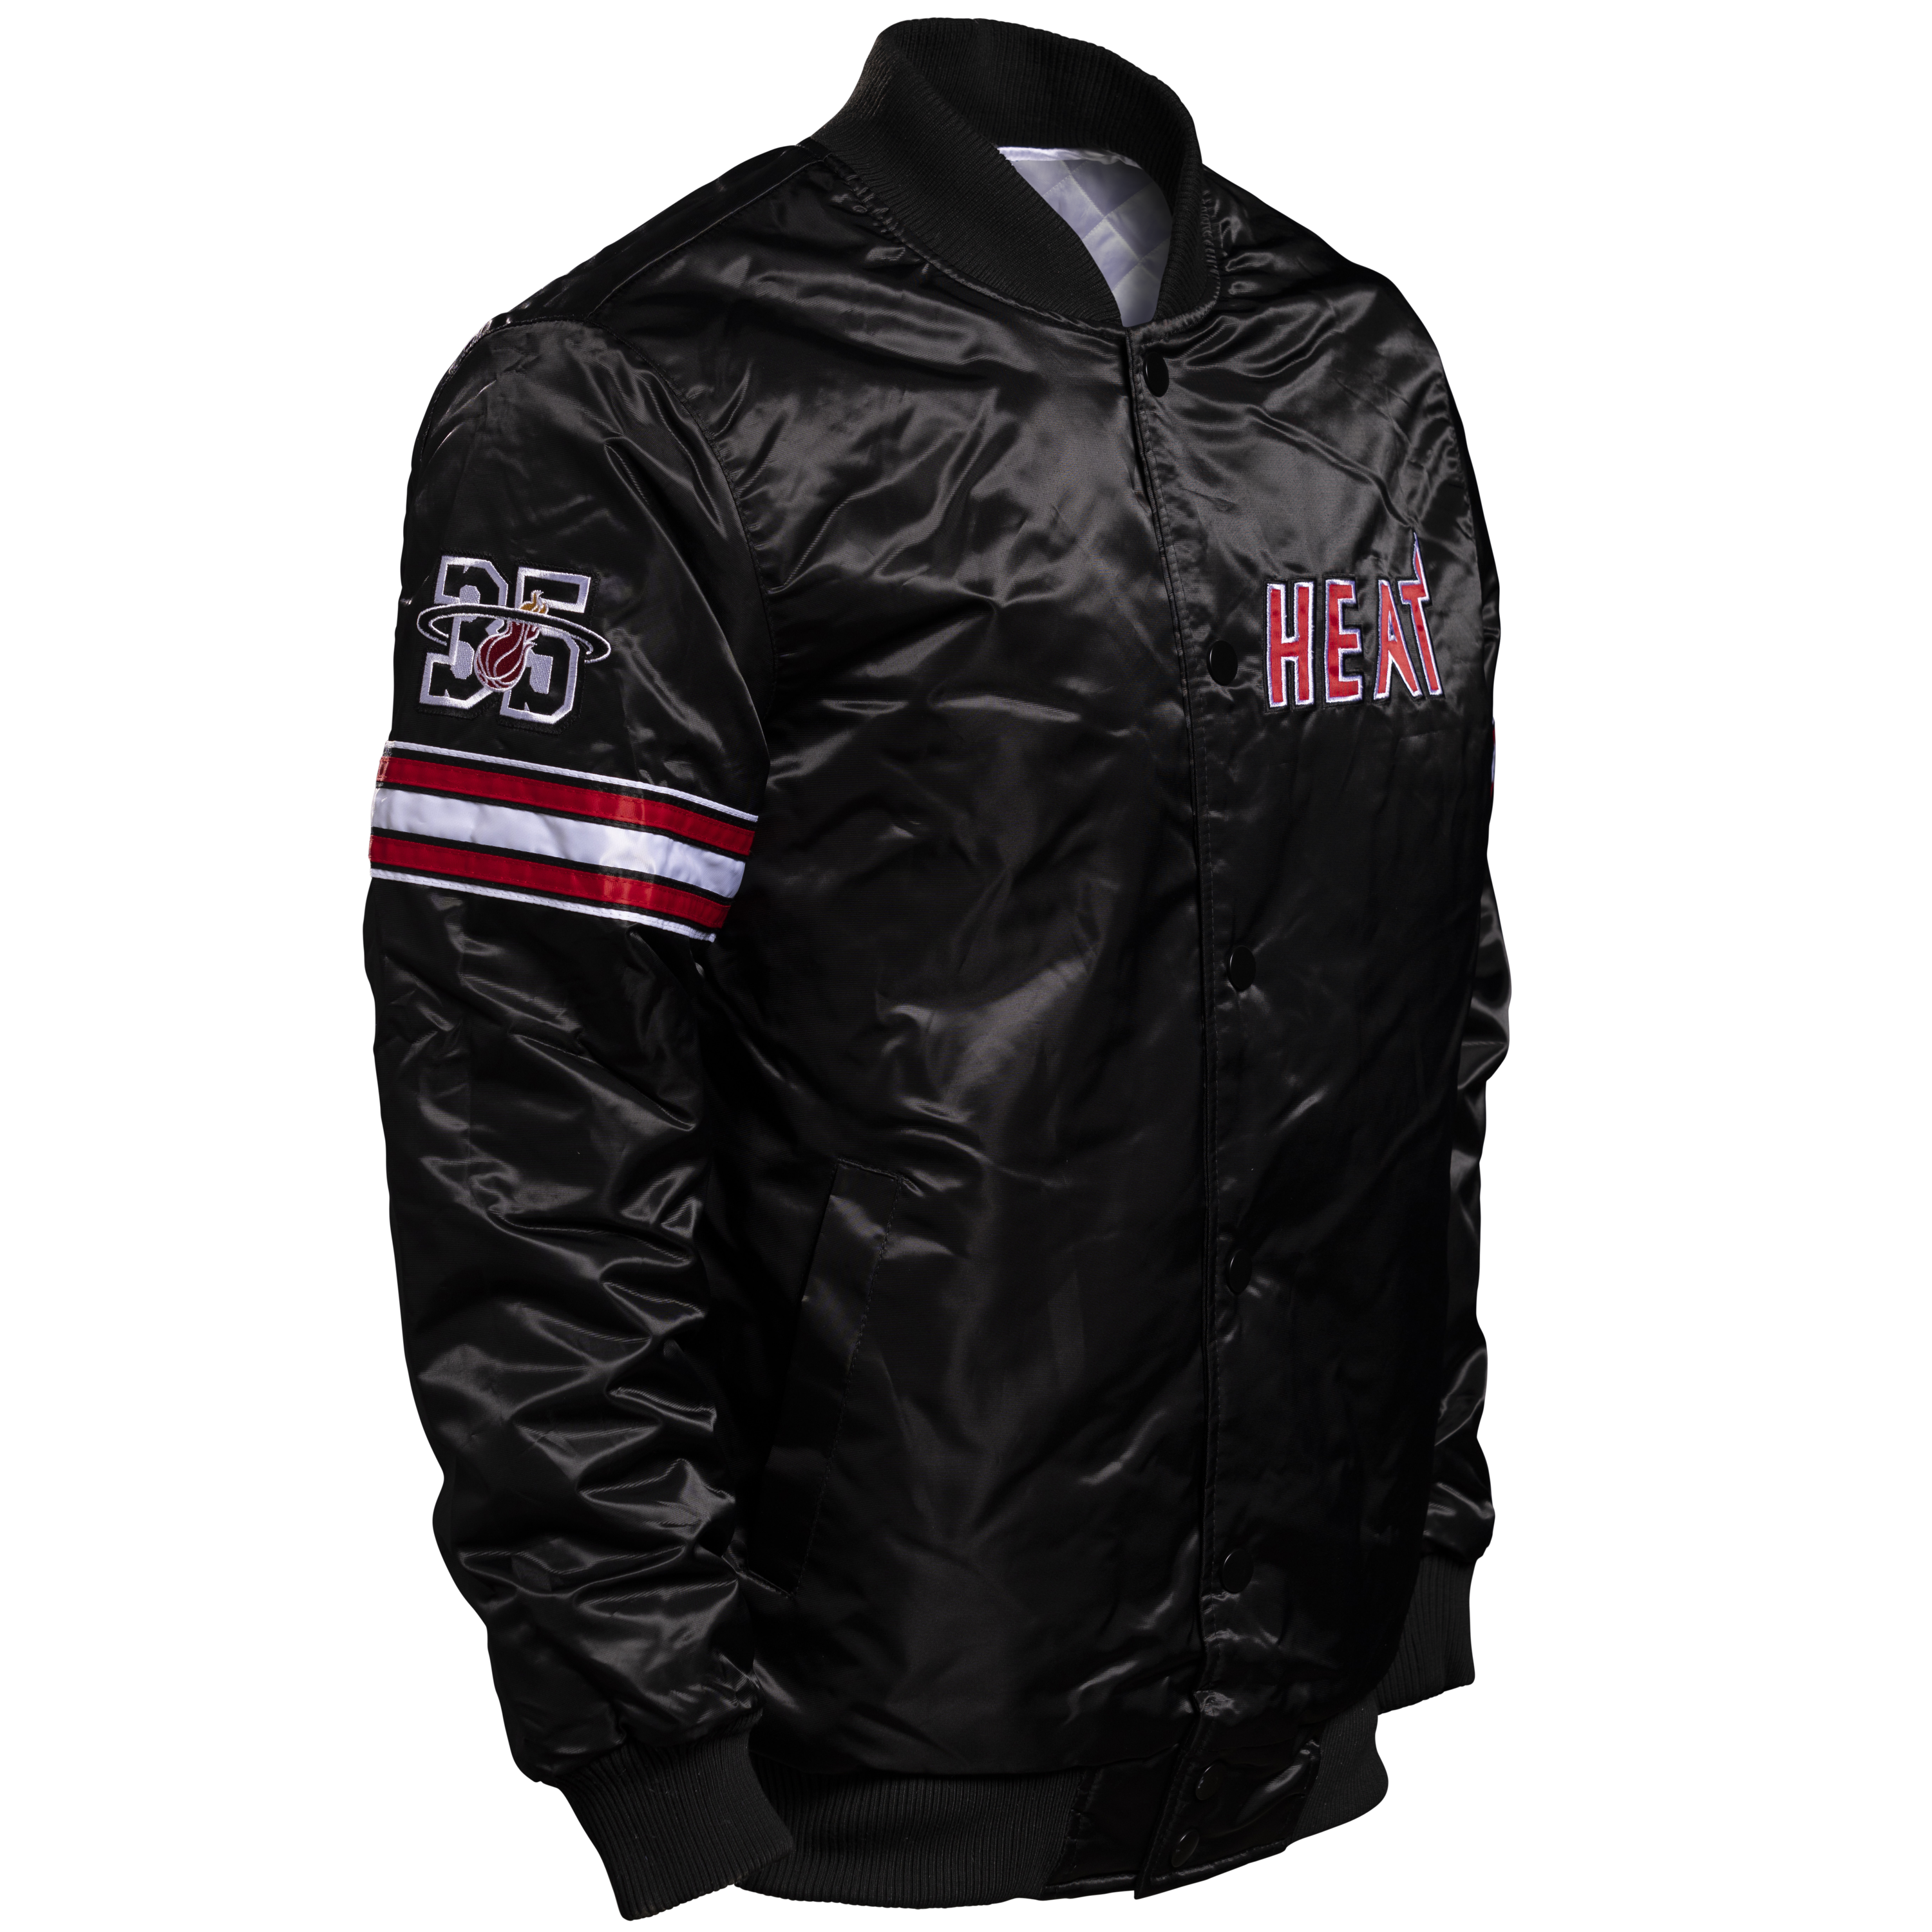 Homage: Starter NBA Warmup Jackets, ONLY 150 of each!